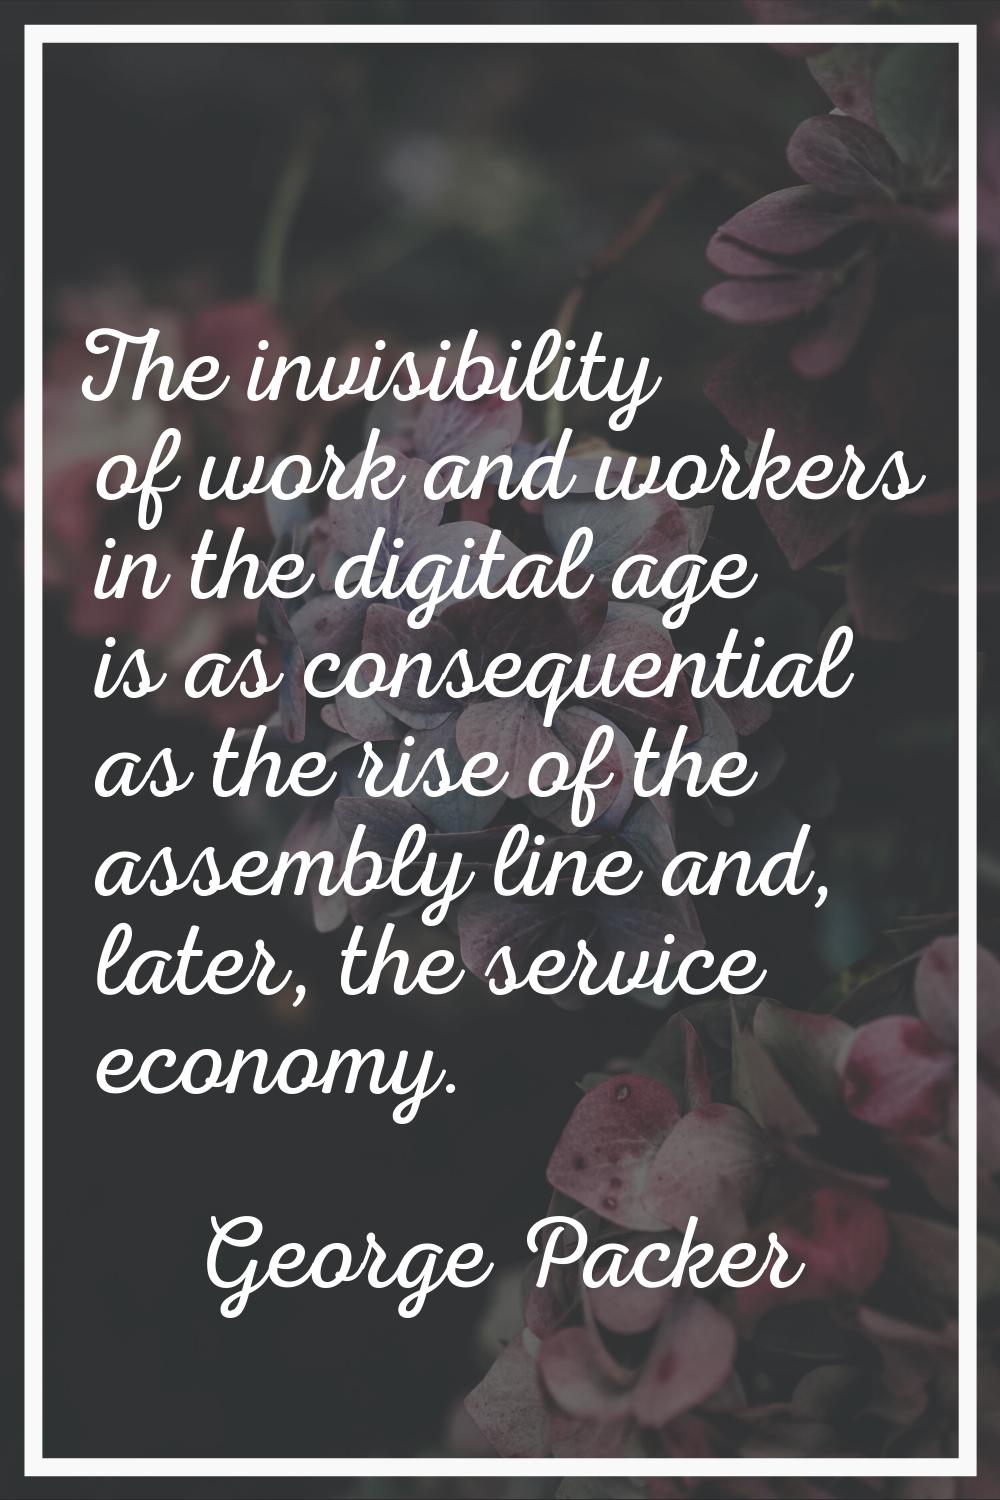 The invisibility of work and workers in the digital age is as consequential as the rise of the asse